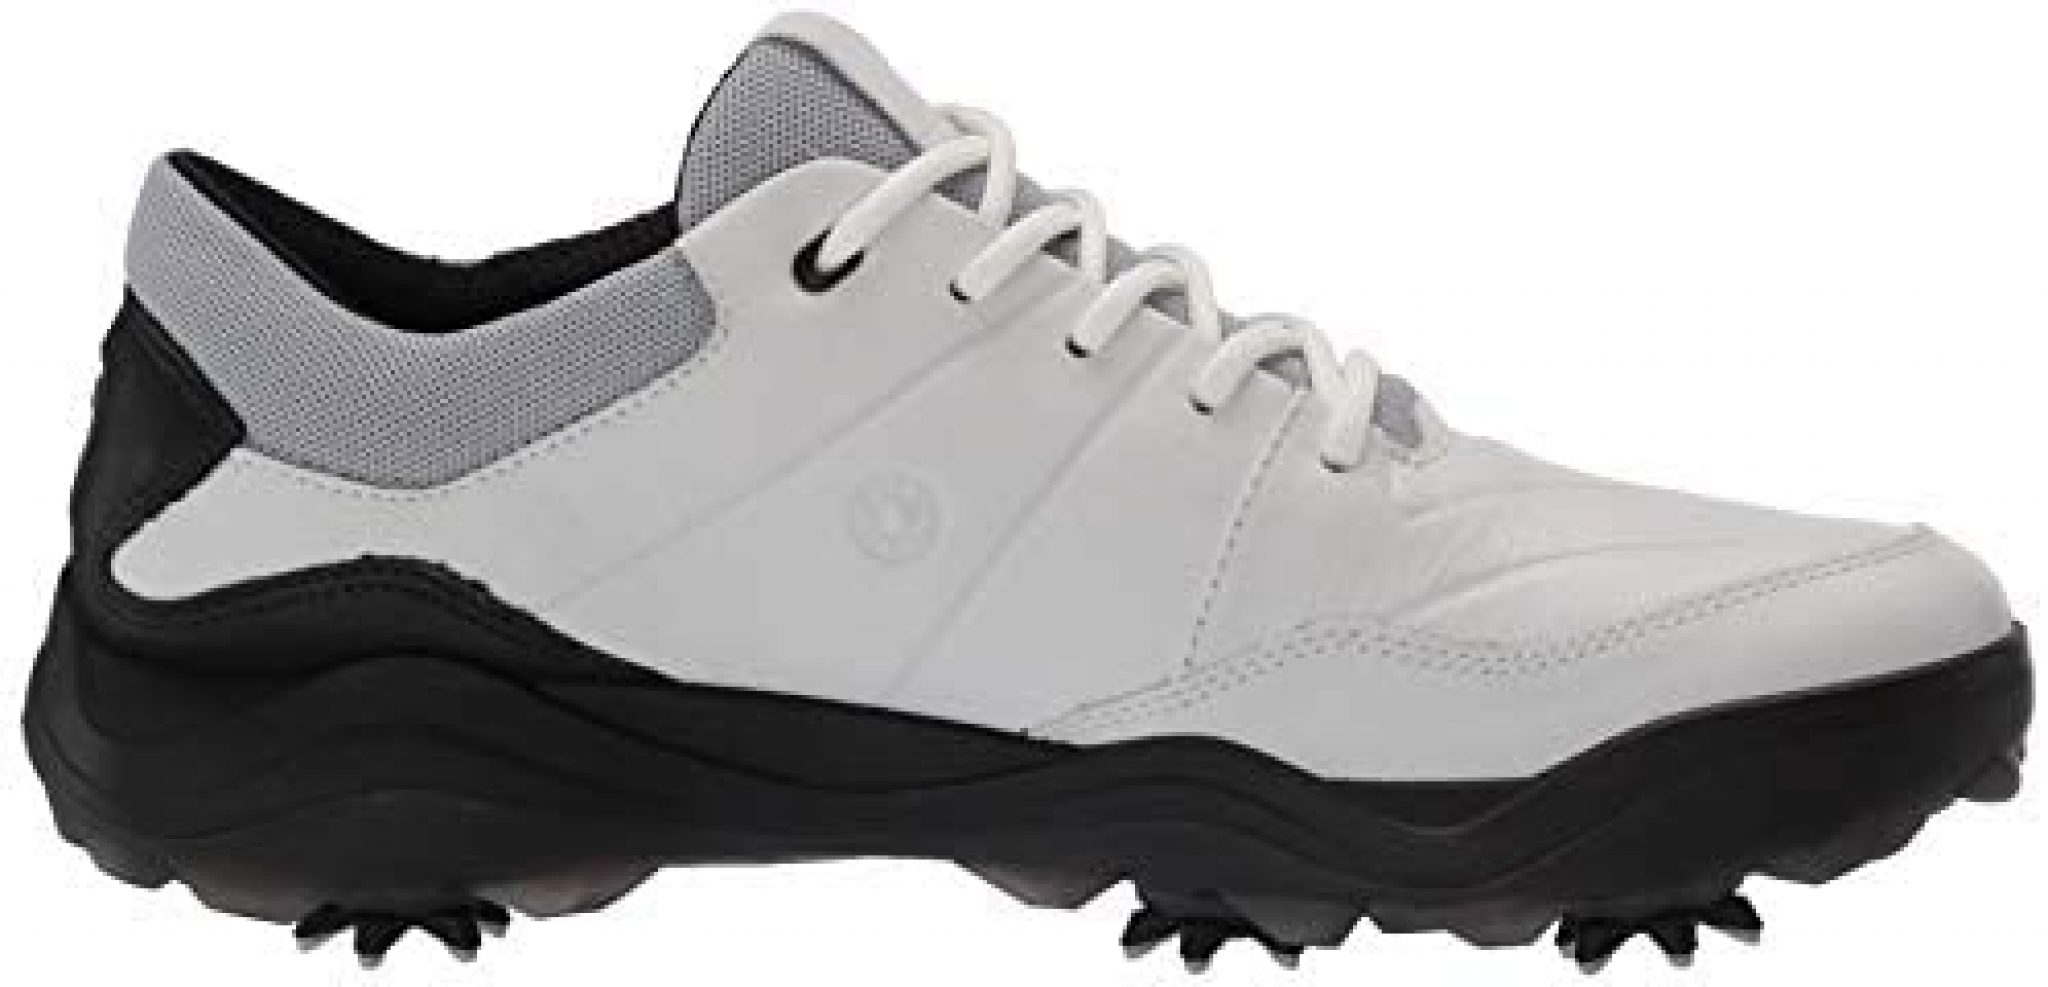 Ecco Hydromax Golf Shoes Review